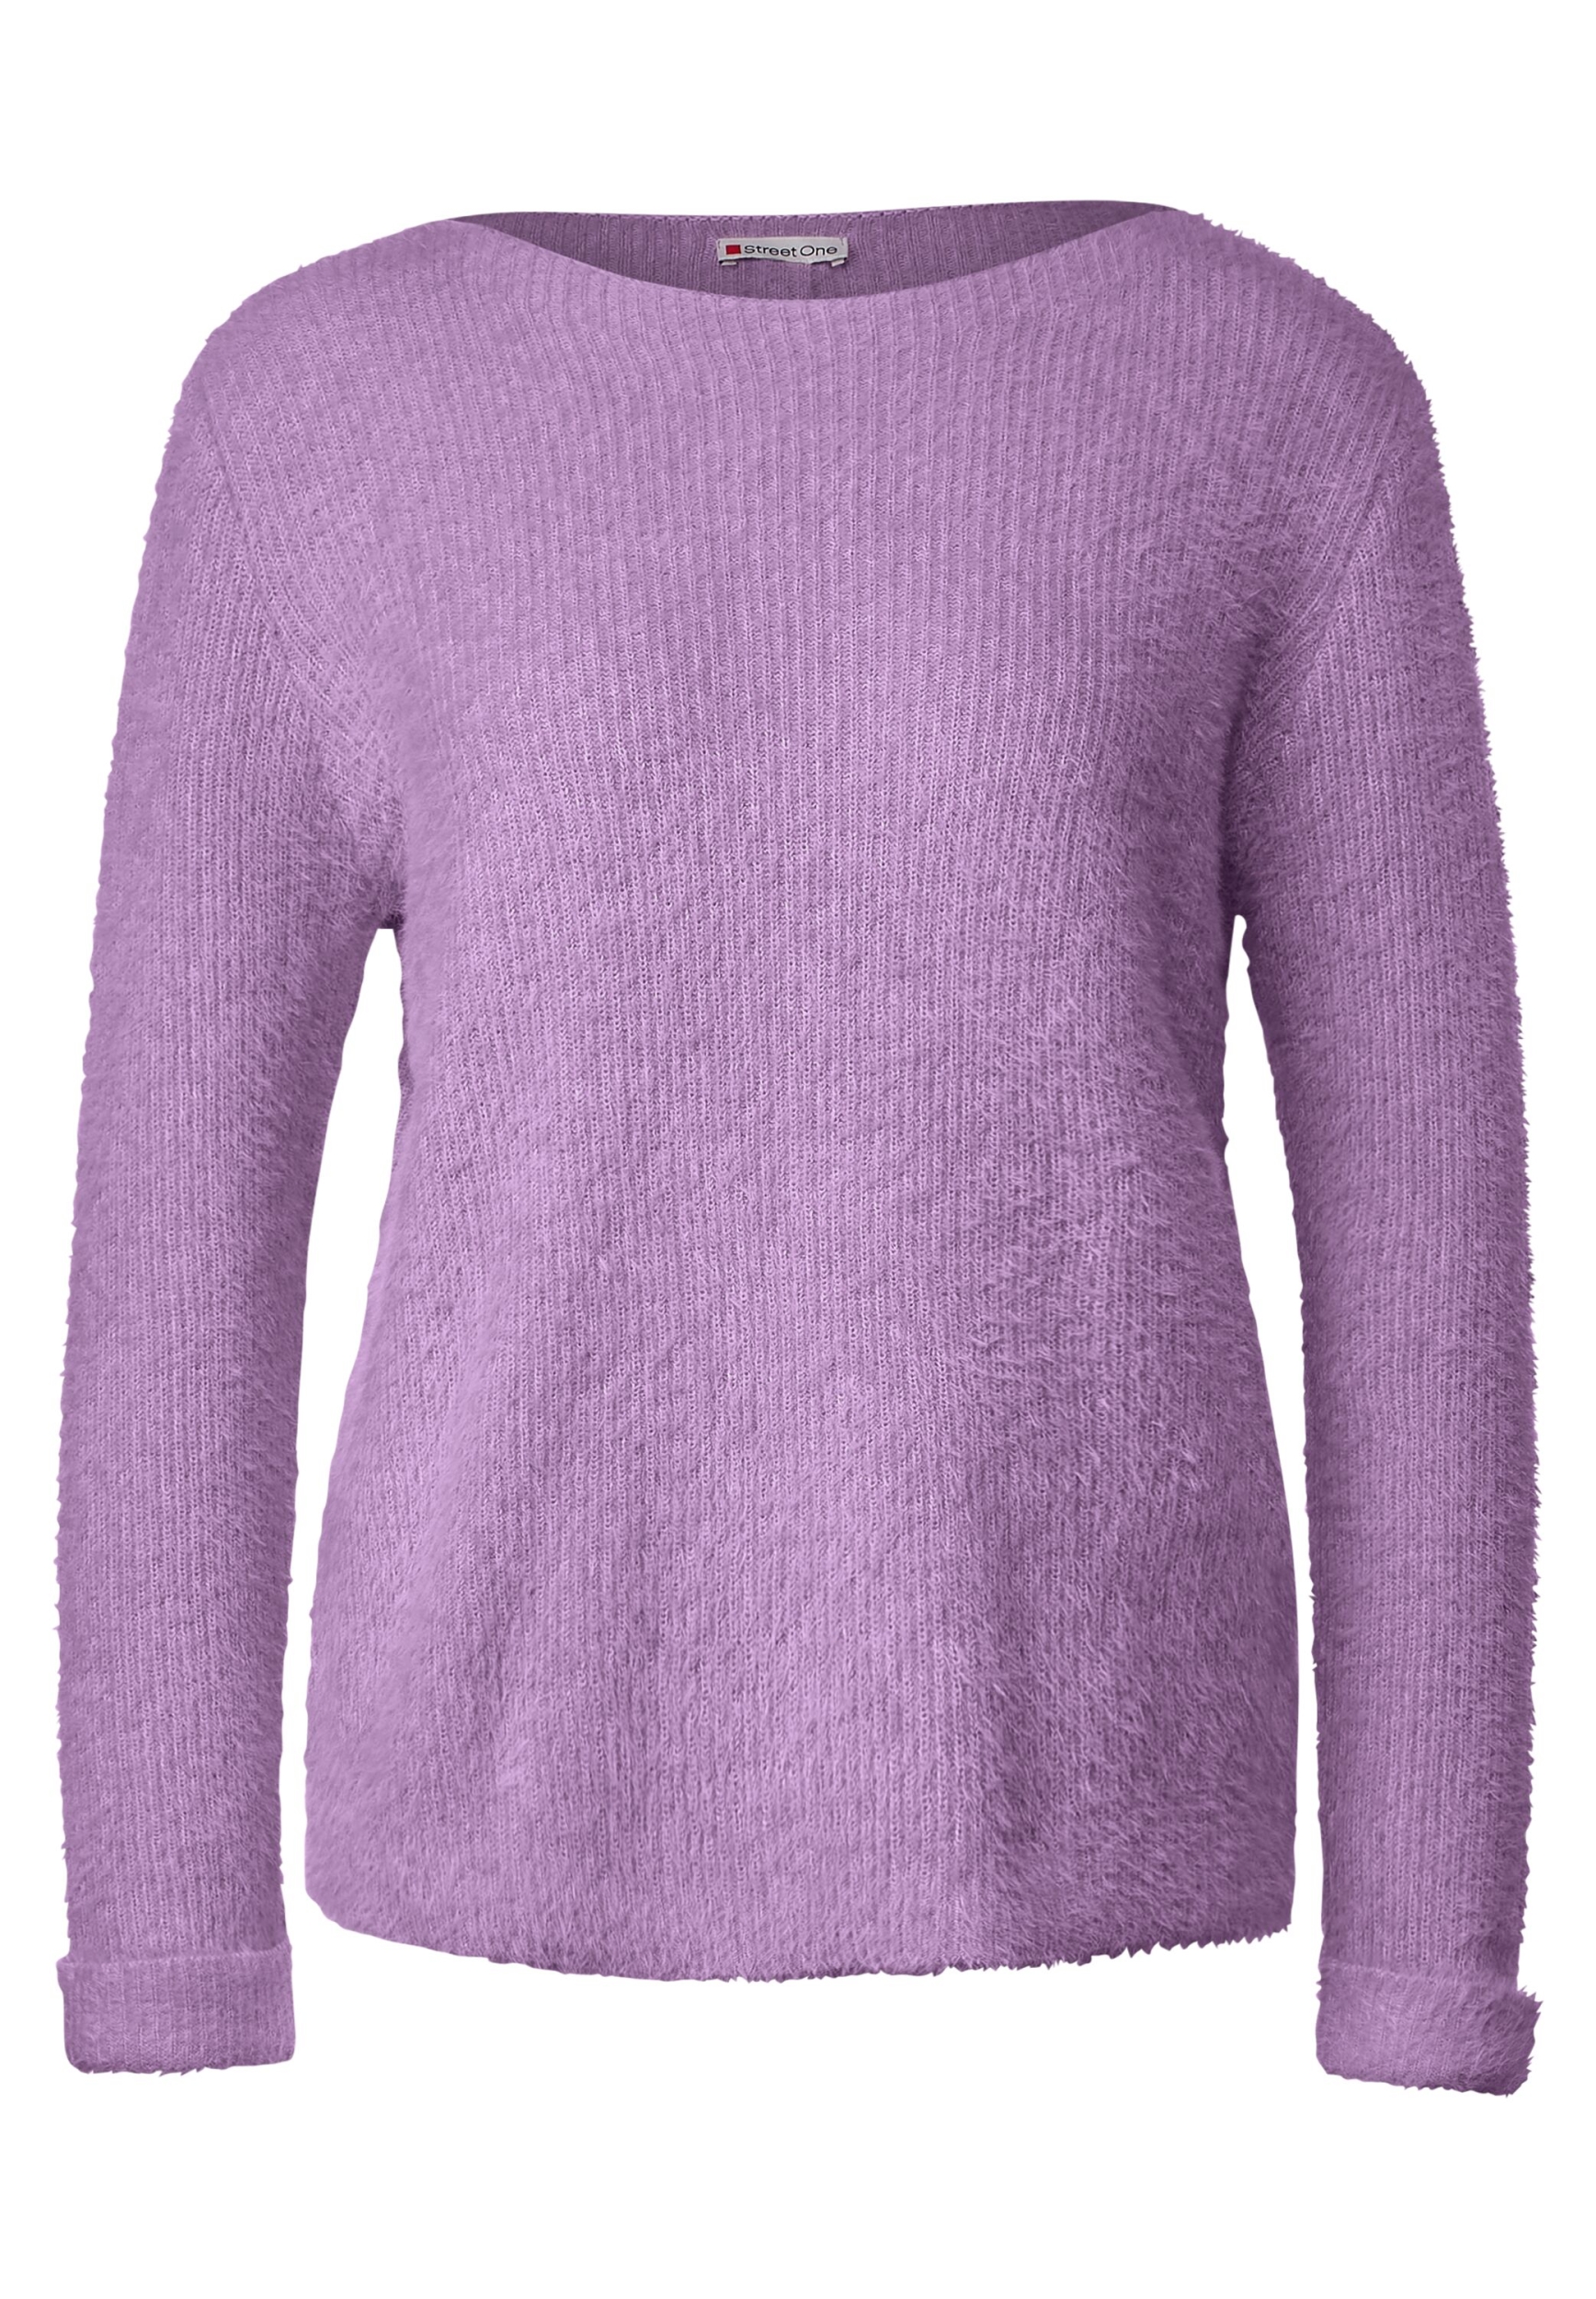 BF_sweater feather yarn | 46 | soft pure lilac | A302413-15289-46